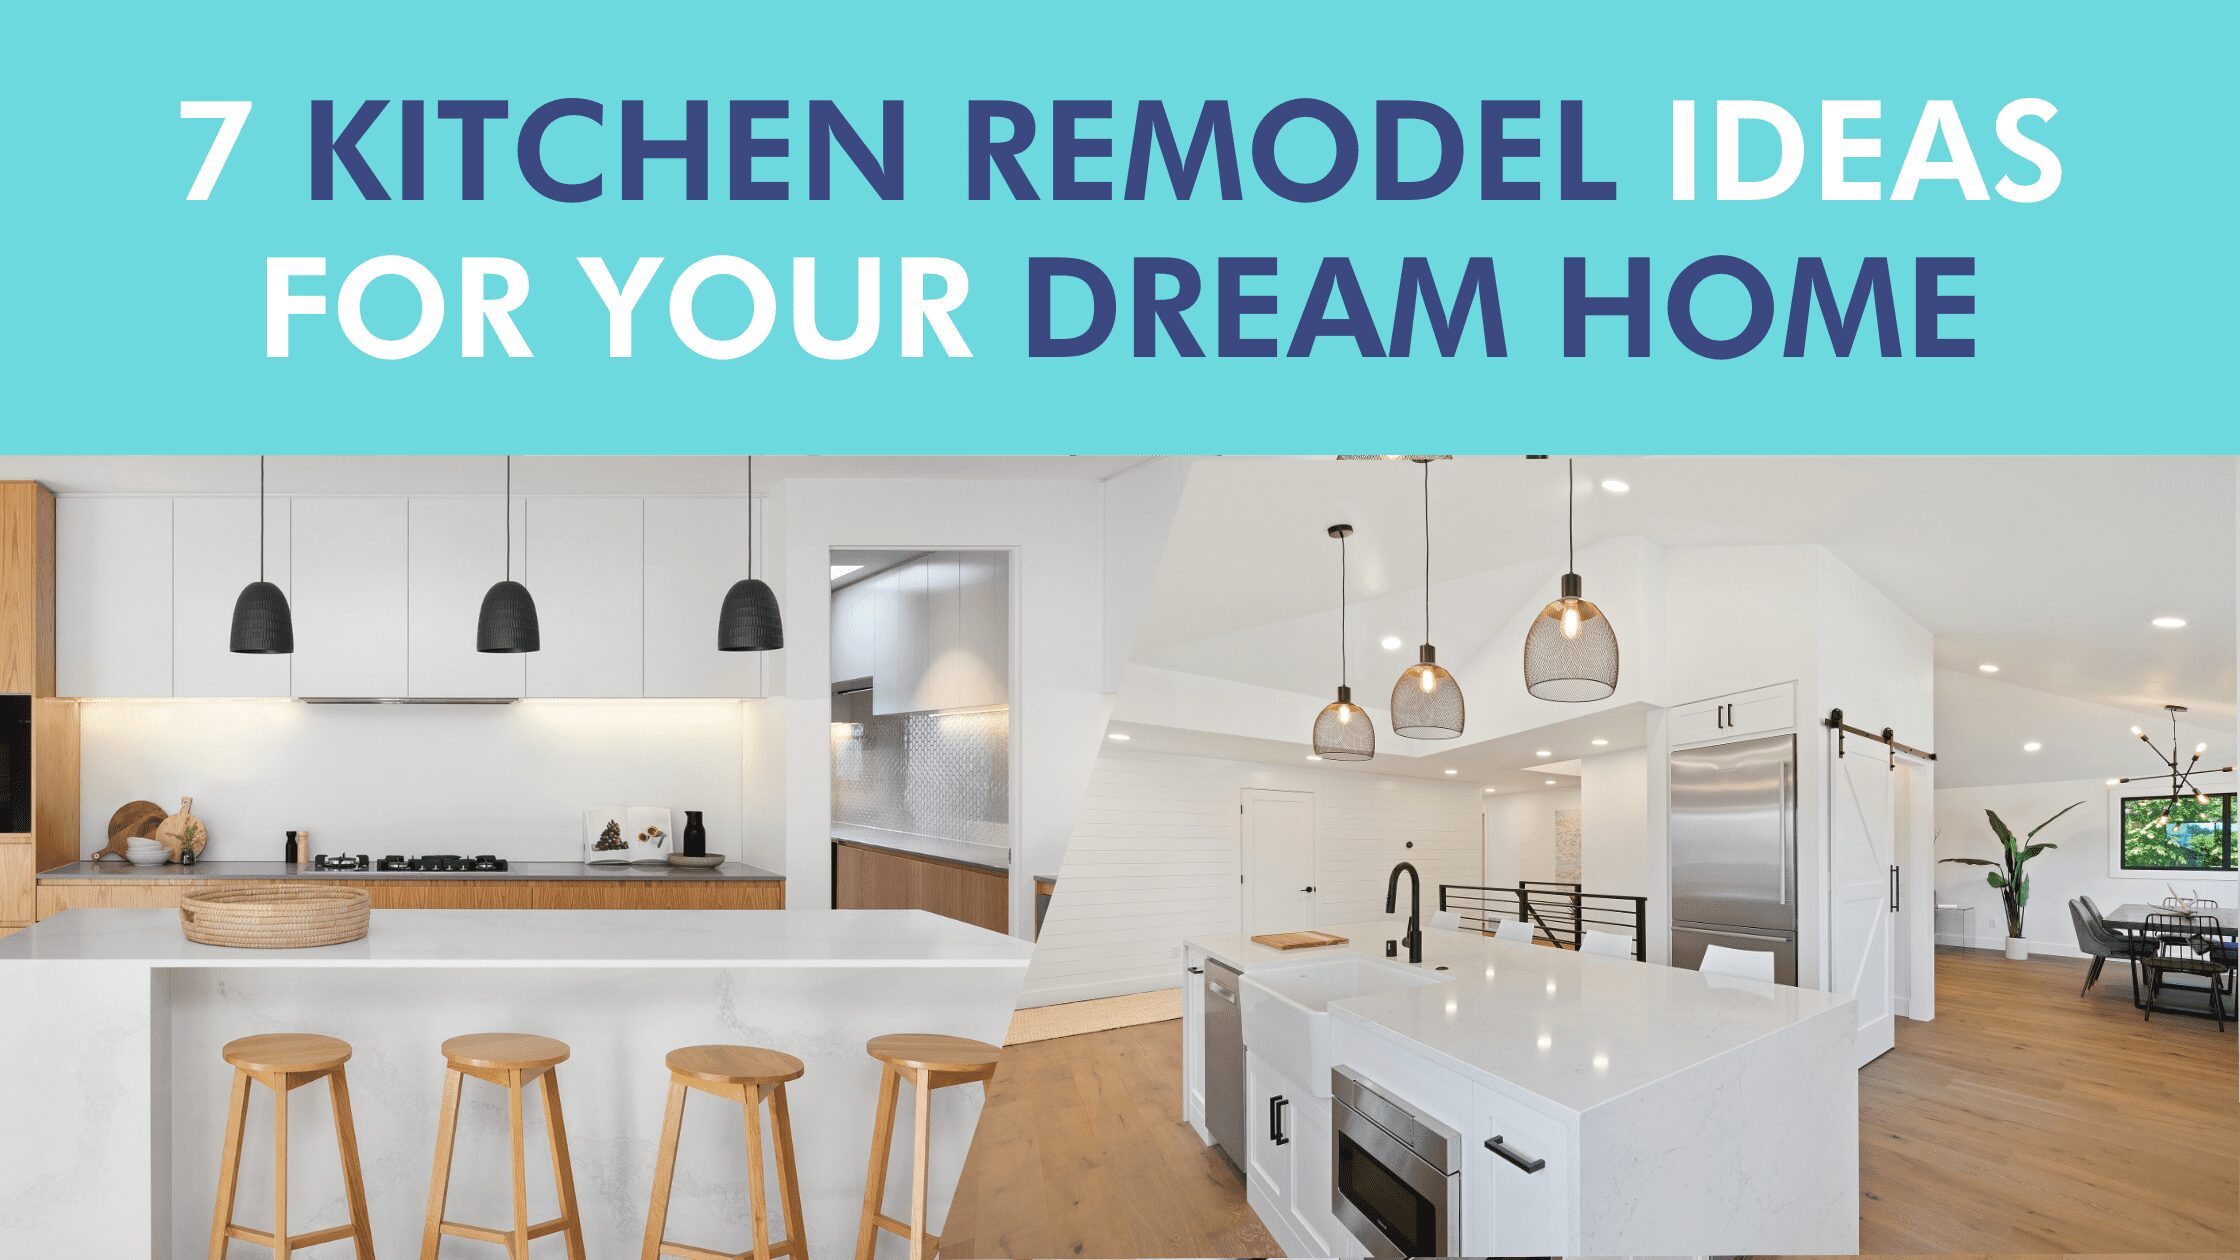 18 Kitchen Remodel Ideas for Your Dream Home